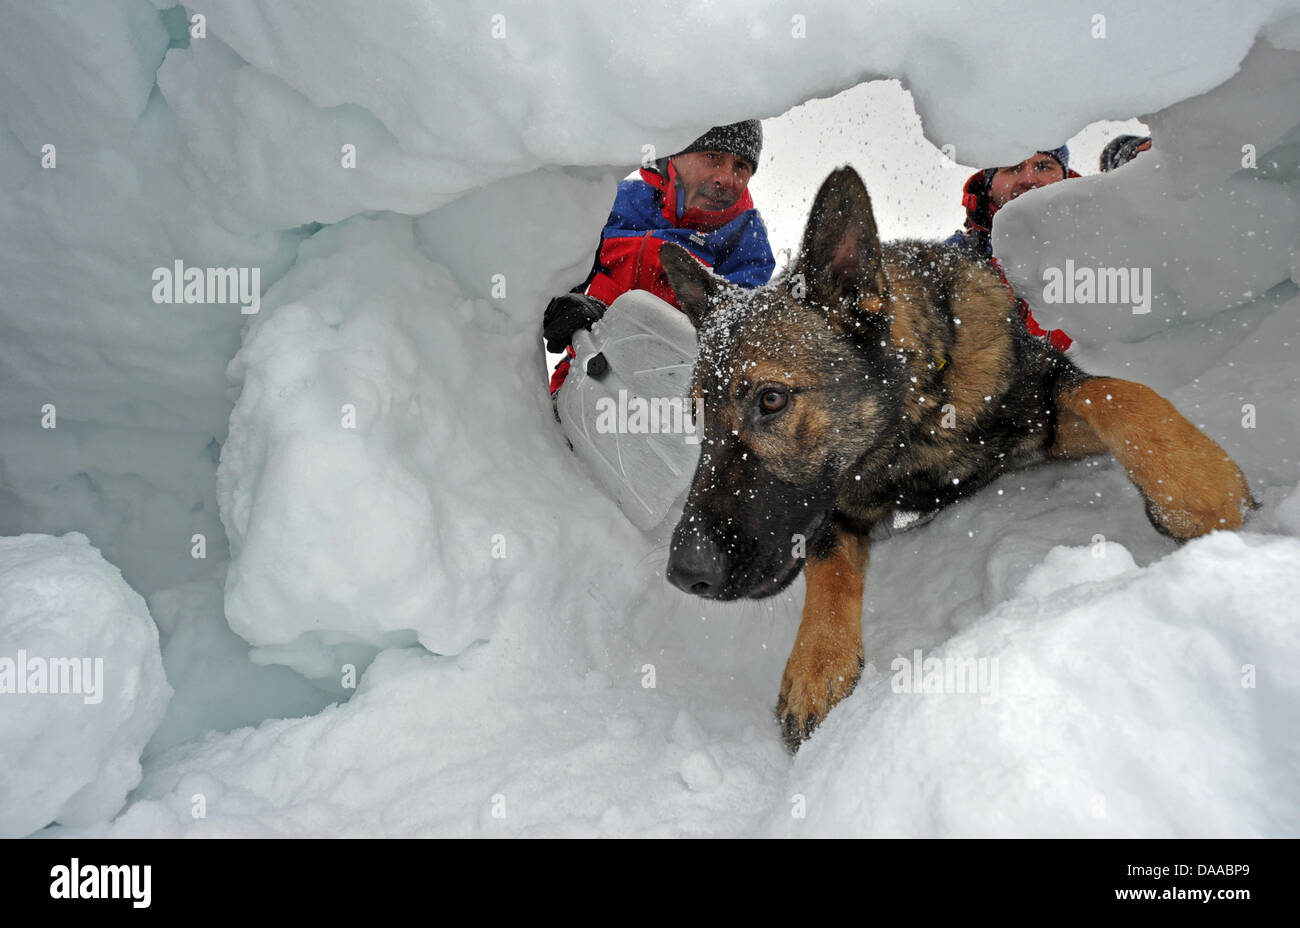 Dog handlers Winfried Strunz (L) and Andreas Schuetz of the mountain rescue service simulate the search for a person after an avalanche accident with German shepherd Balu near Garmisch-Partenkirchen, Germany, 19 January 2009. Every year, the mountain rescue service of the Bavarian Red Cross trains dogs to be avalanche search dogs. Photo: Peter Kneffel Stock Photo